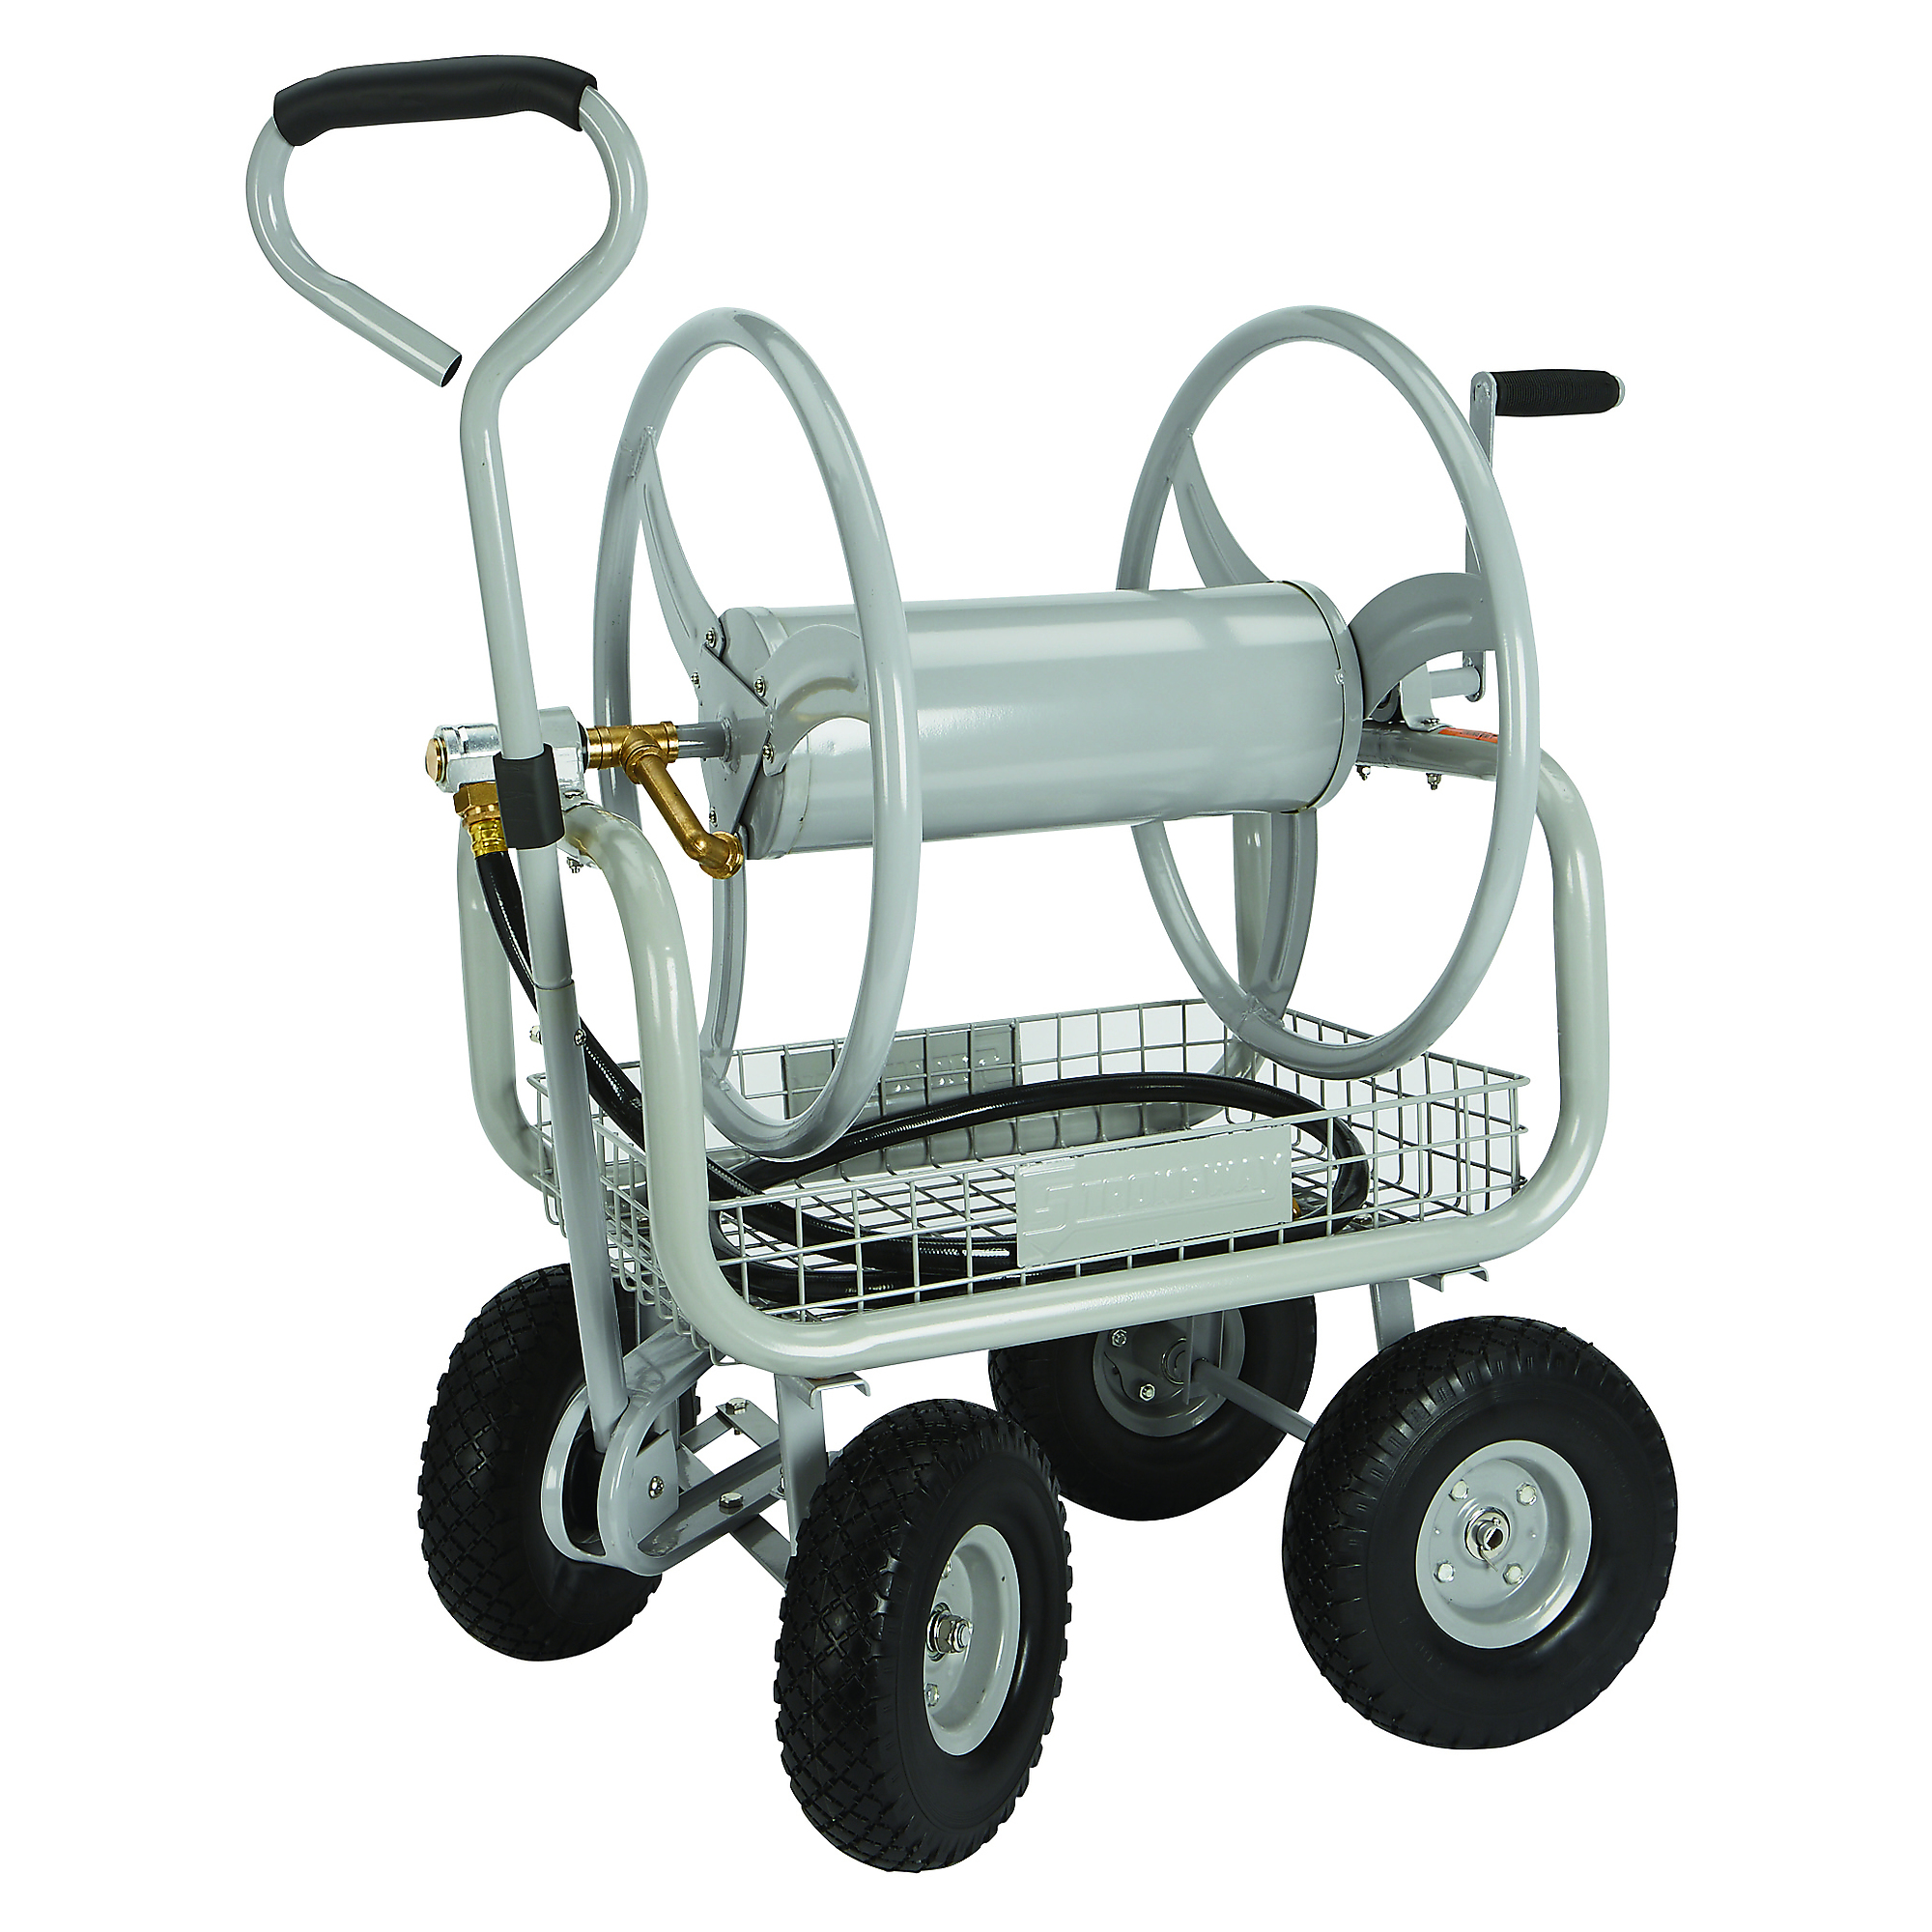 Strongway Hose Reel Cart, Holds 5/8in. x 400ft. Hose